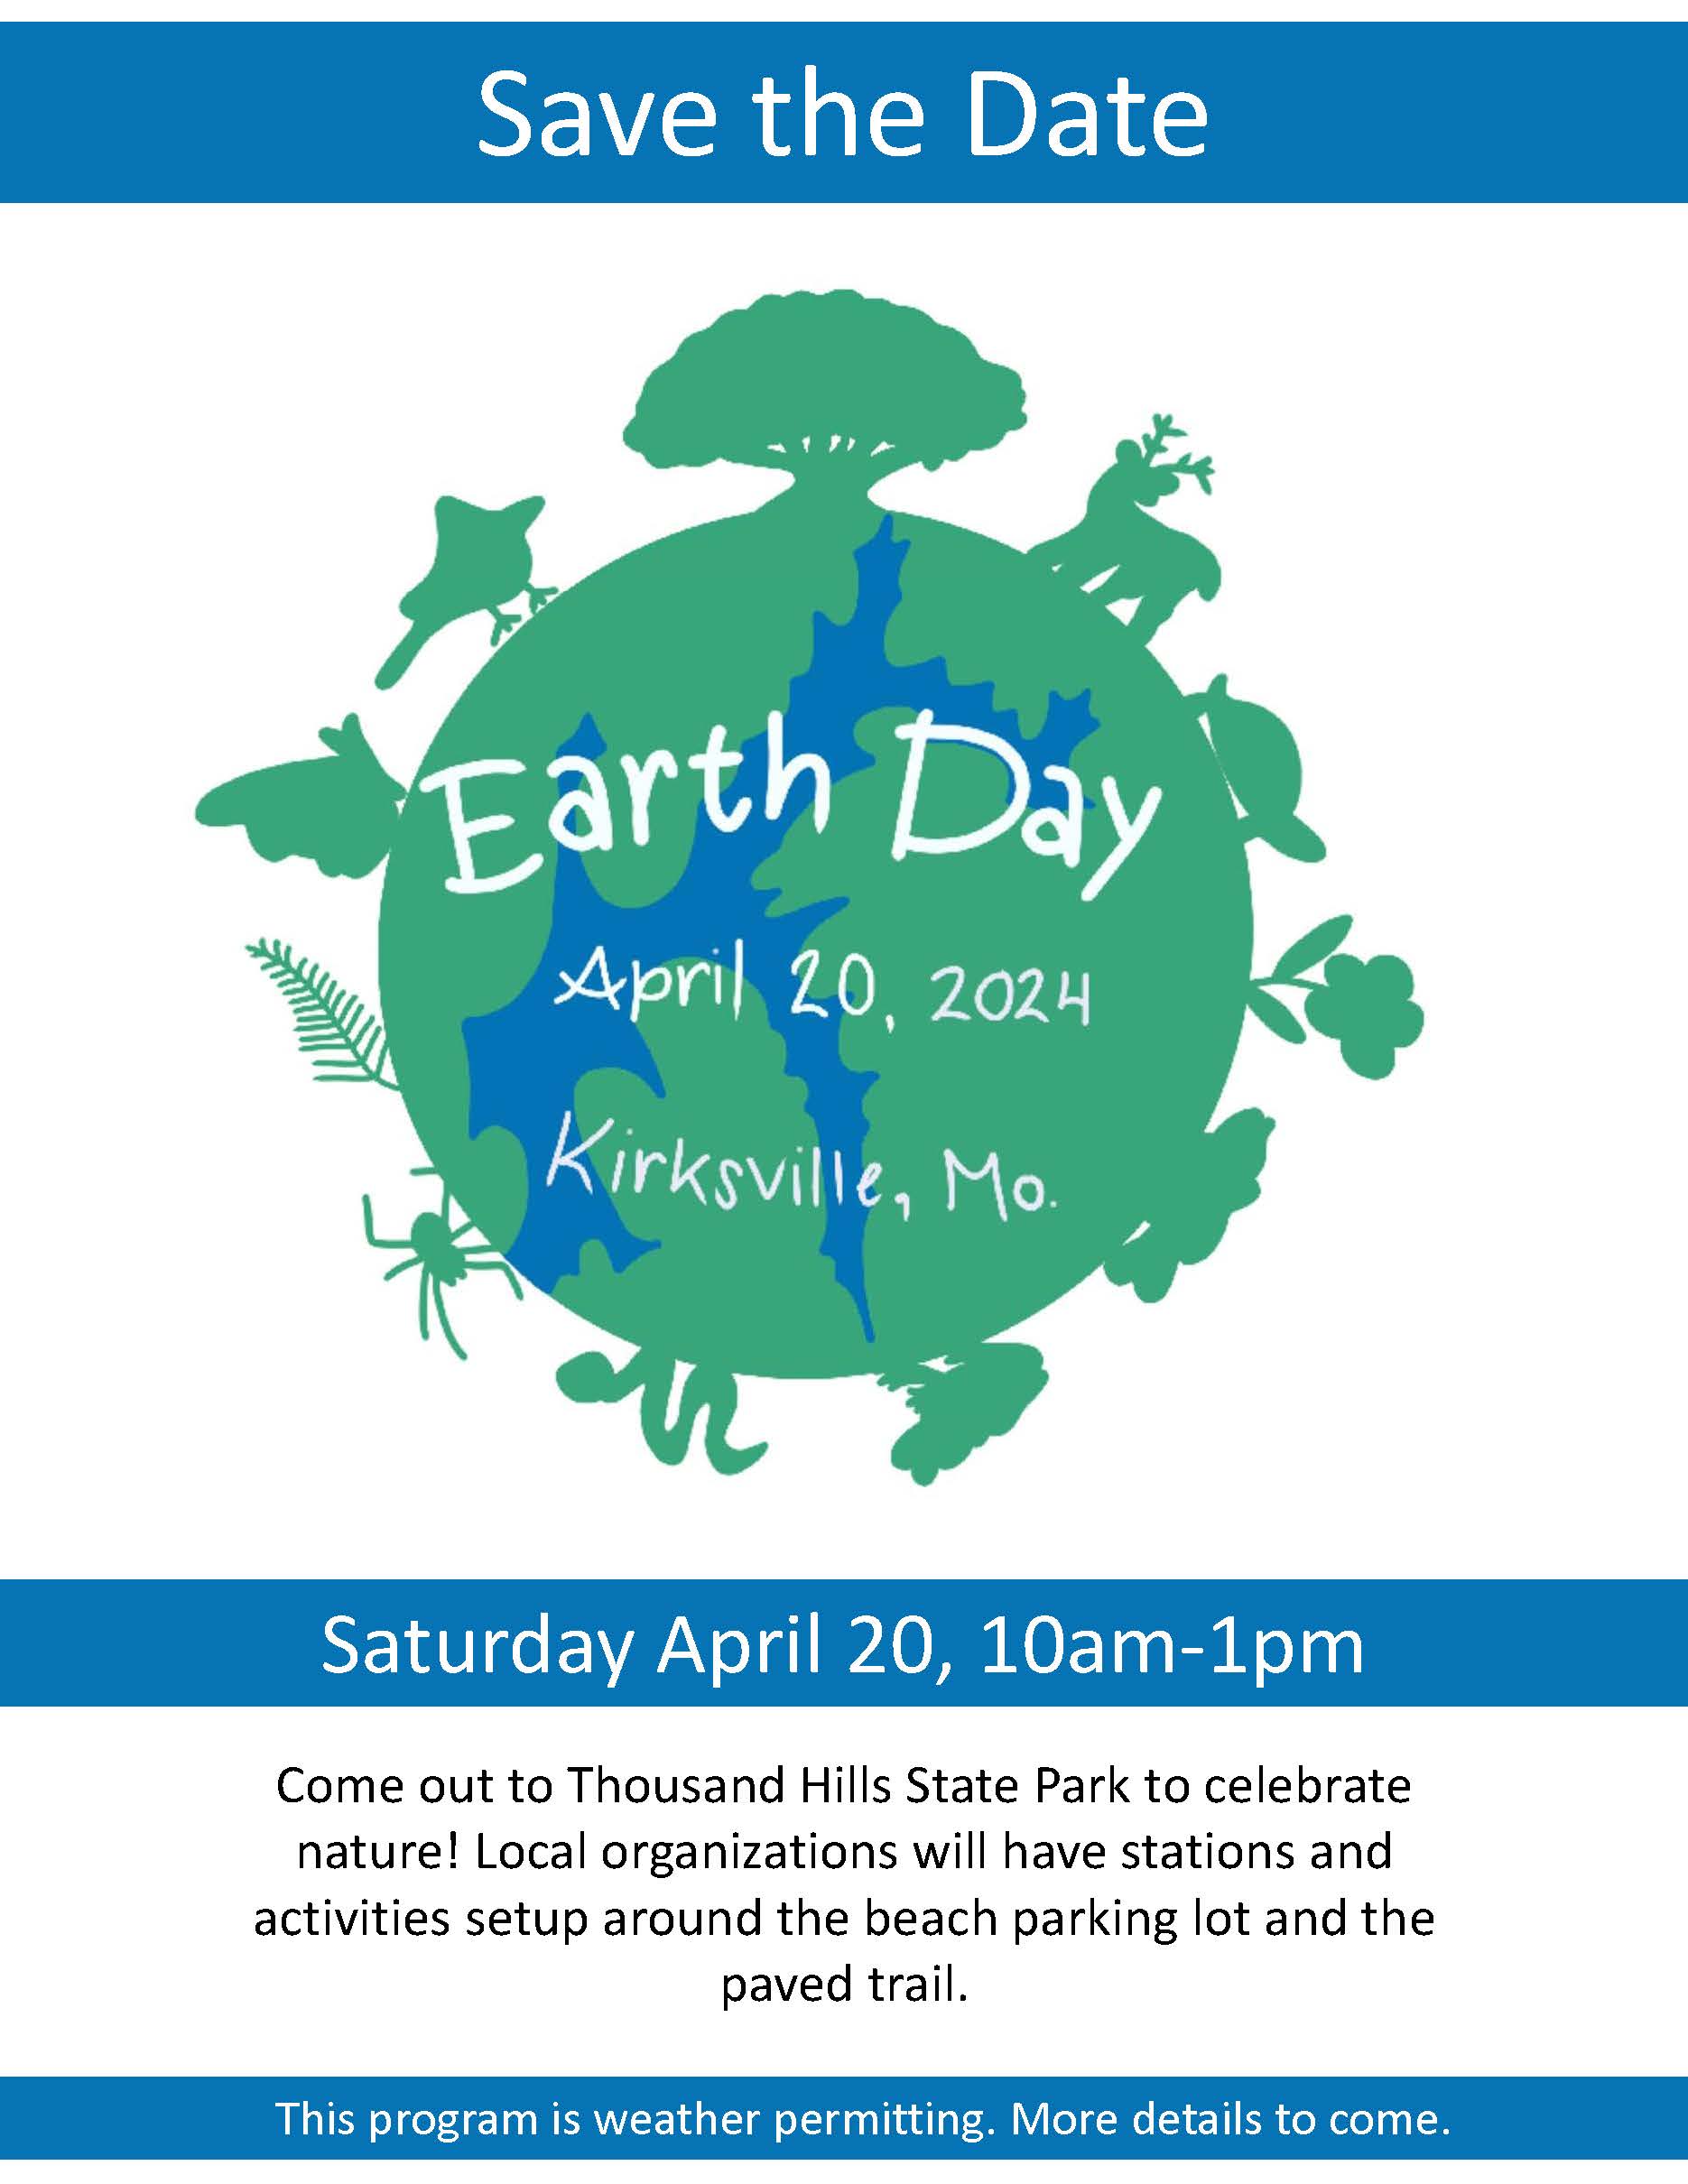 Check more about Earth Day